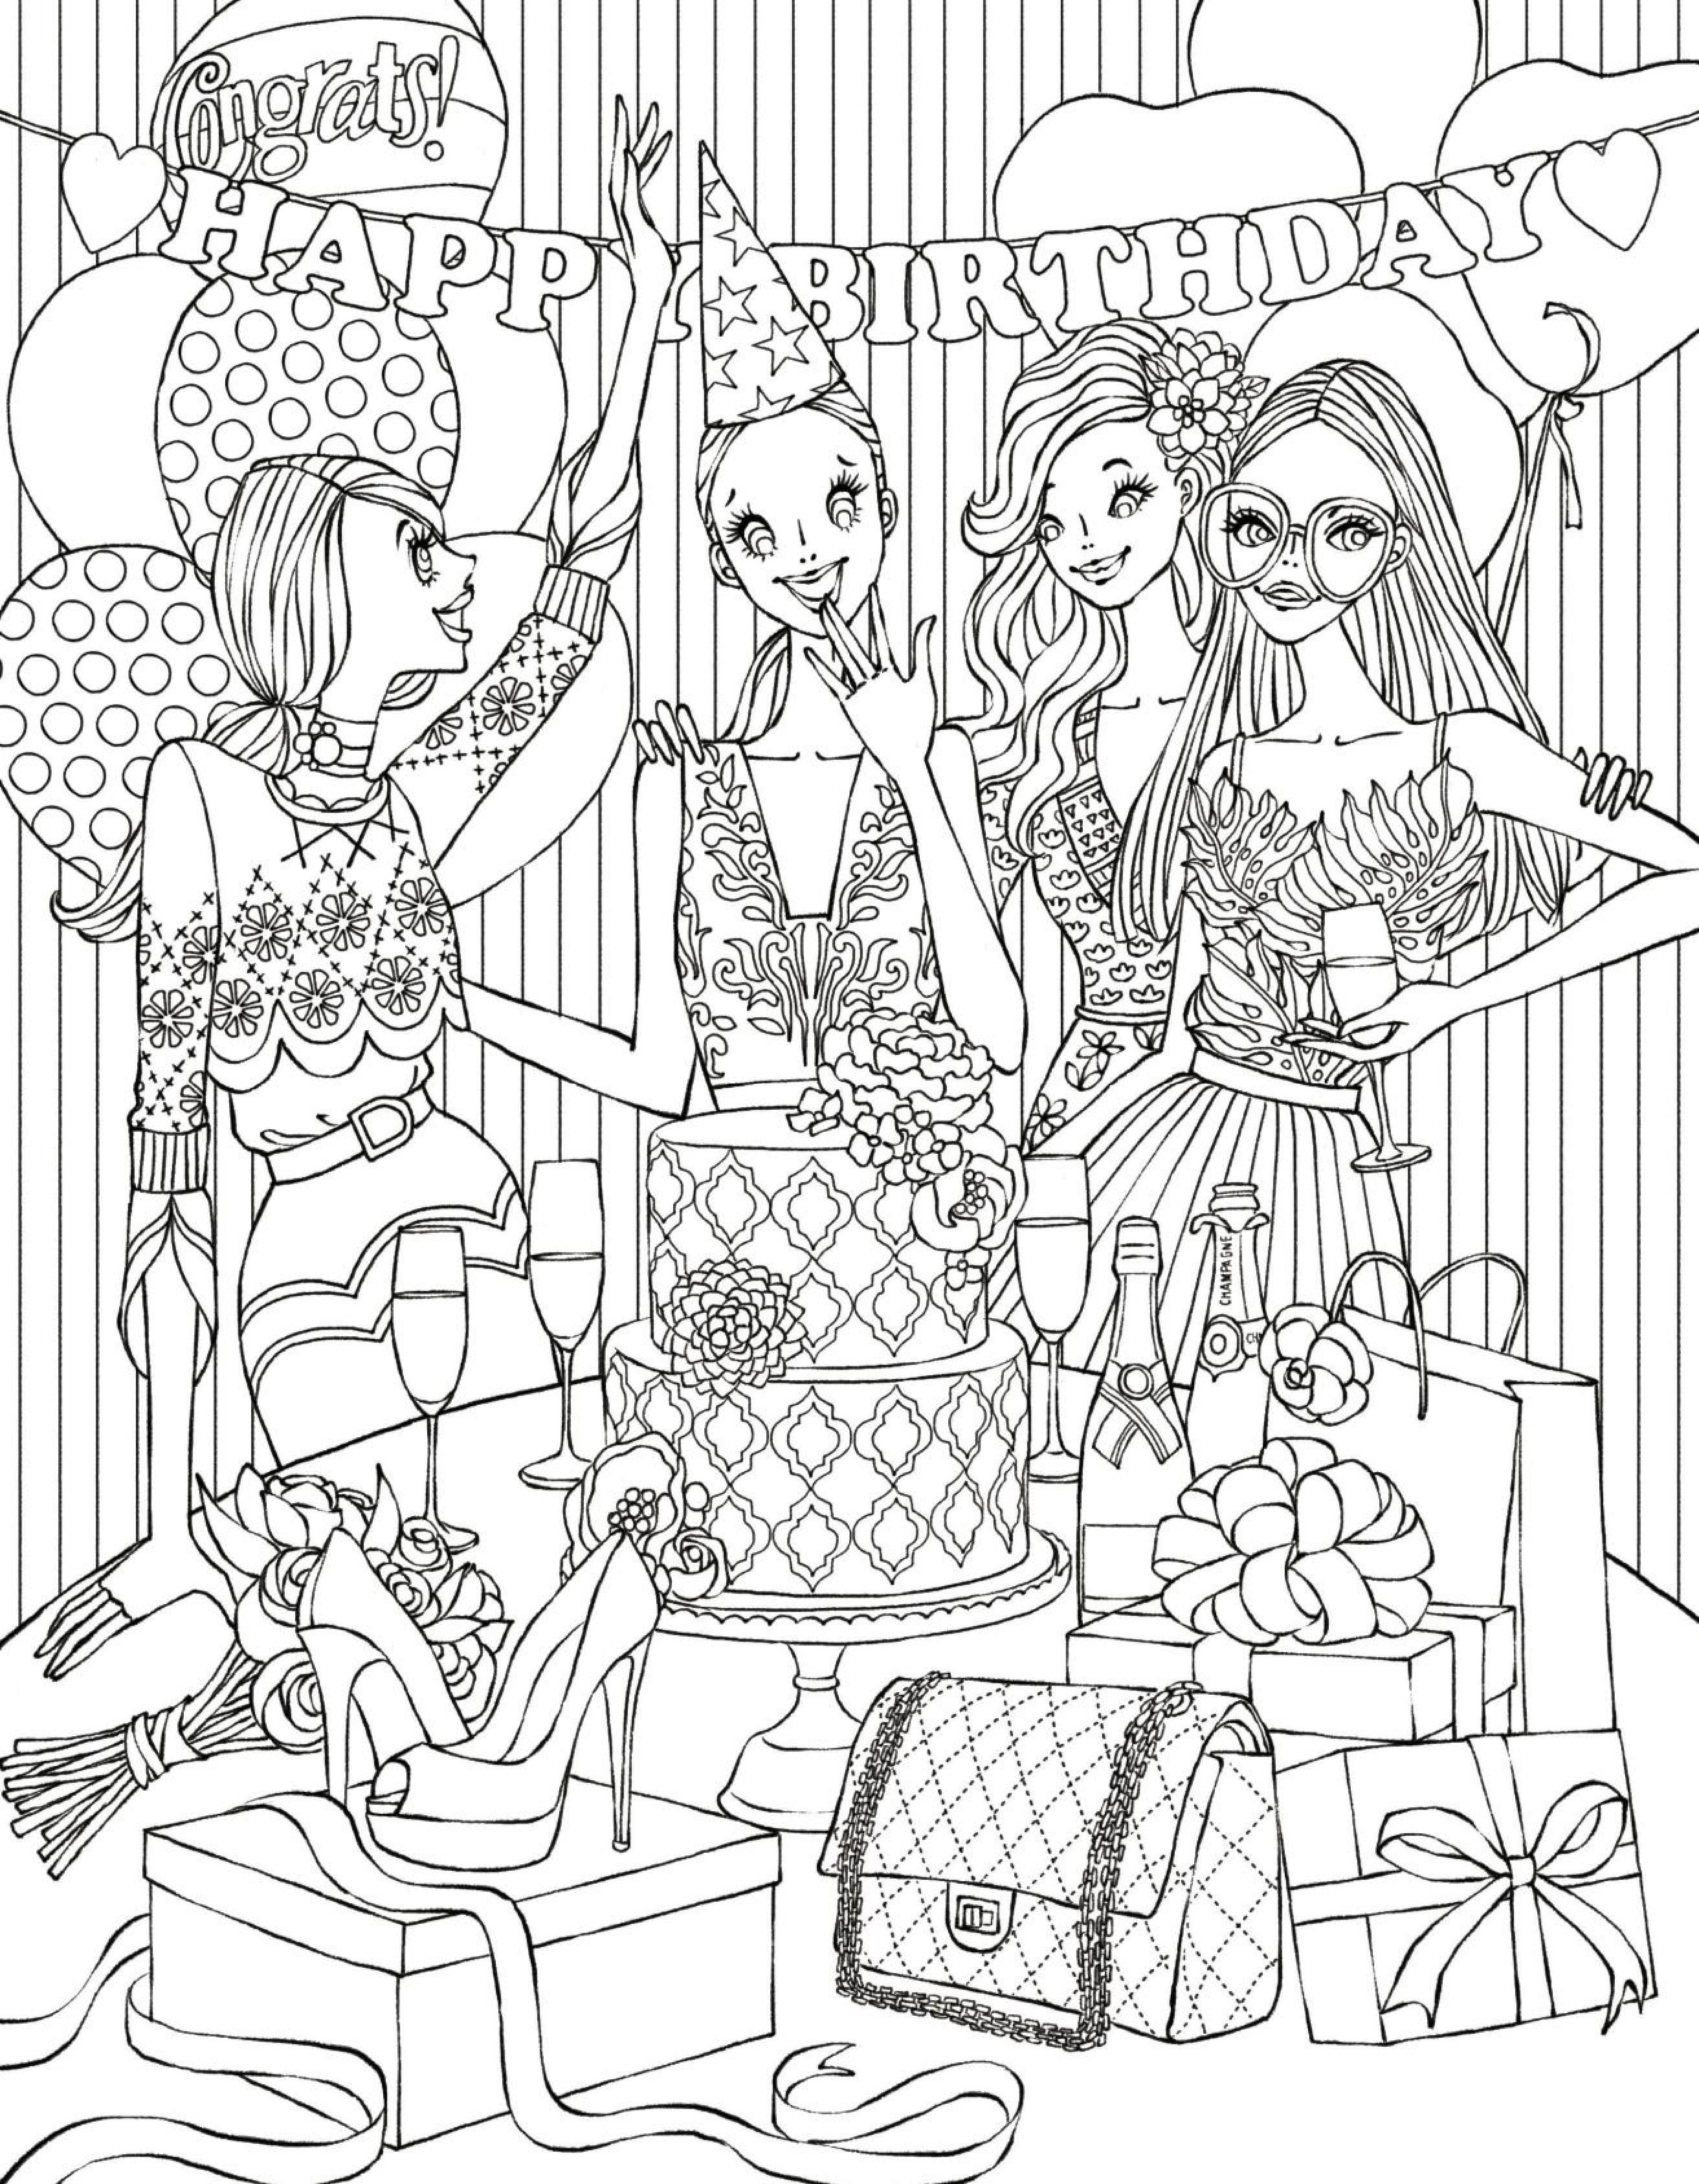 New York State Coloring Page at GetColorings.com | Free printable